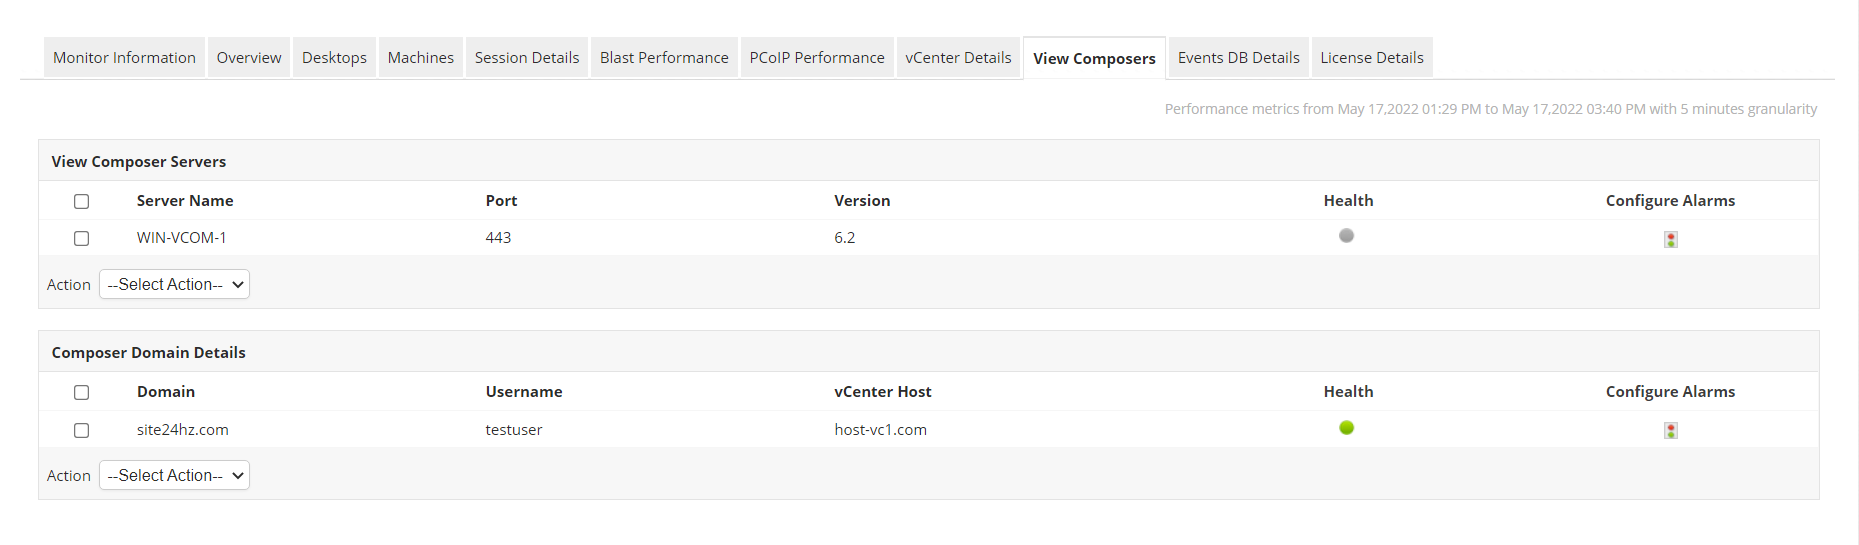 Configuration of vCenter Servers in Horizon View